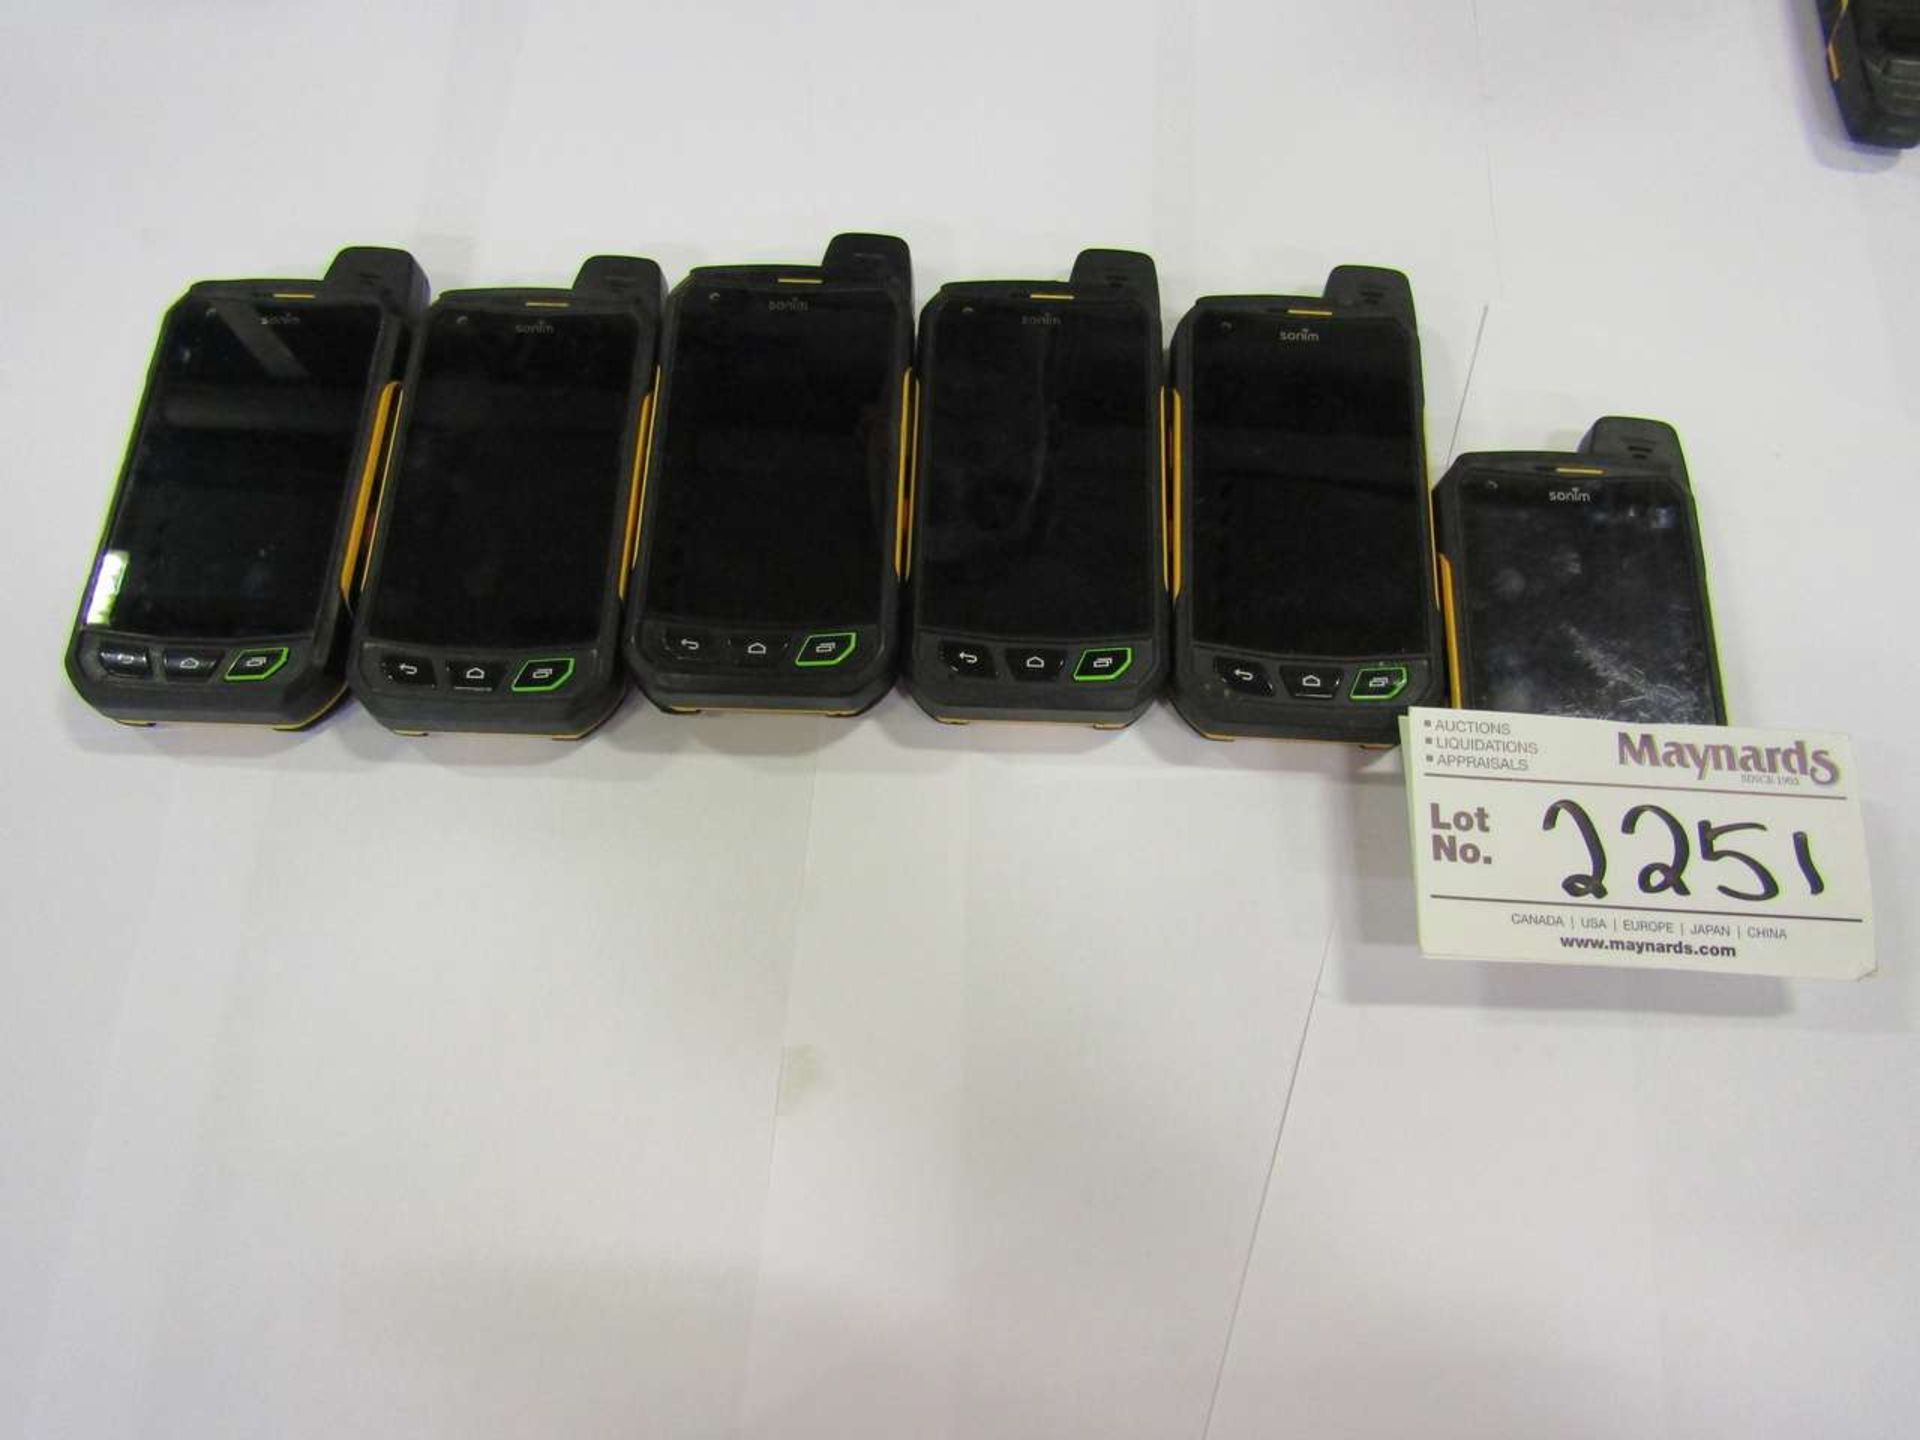 Sonim XP7700 (6) Android Tough Rugged Cell Phones